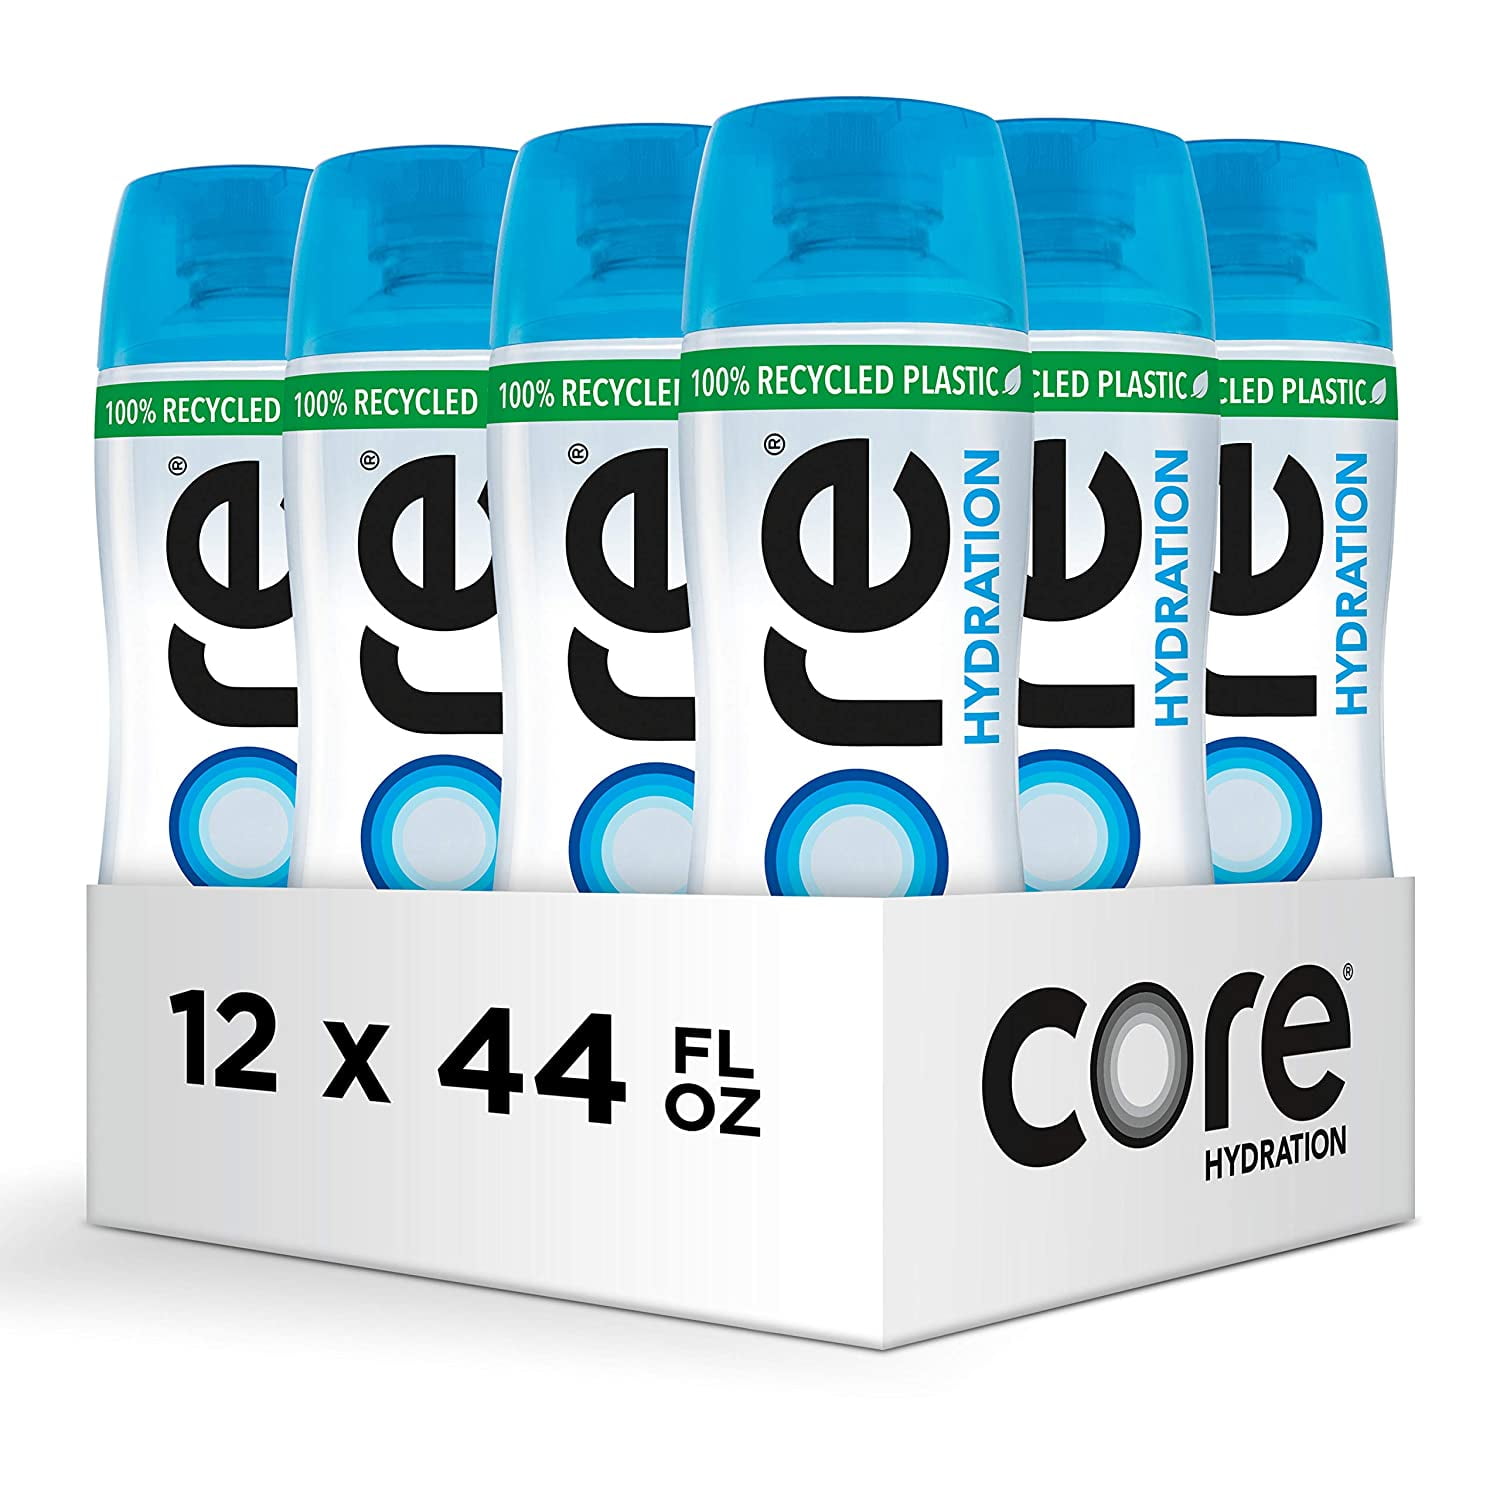 CORE Hydration, Nutrient Enhanced Water, Perfect 7.4 Natural pH